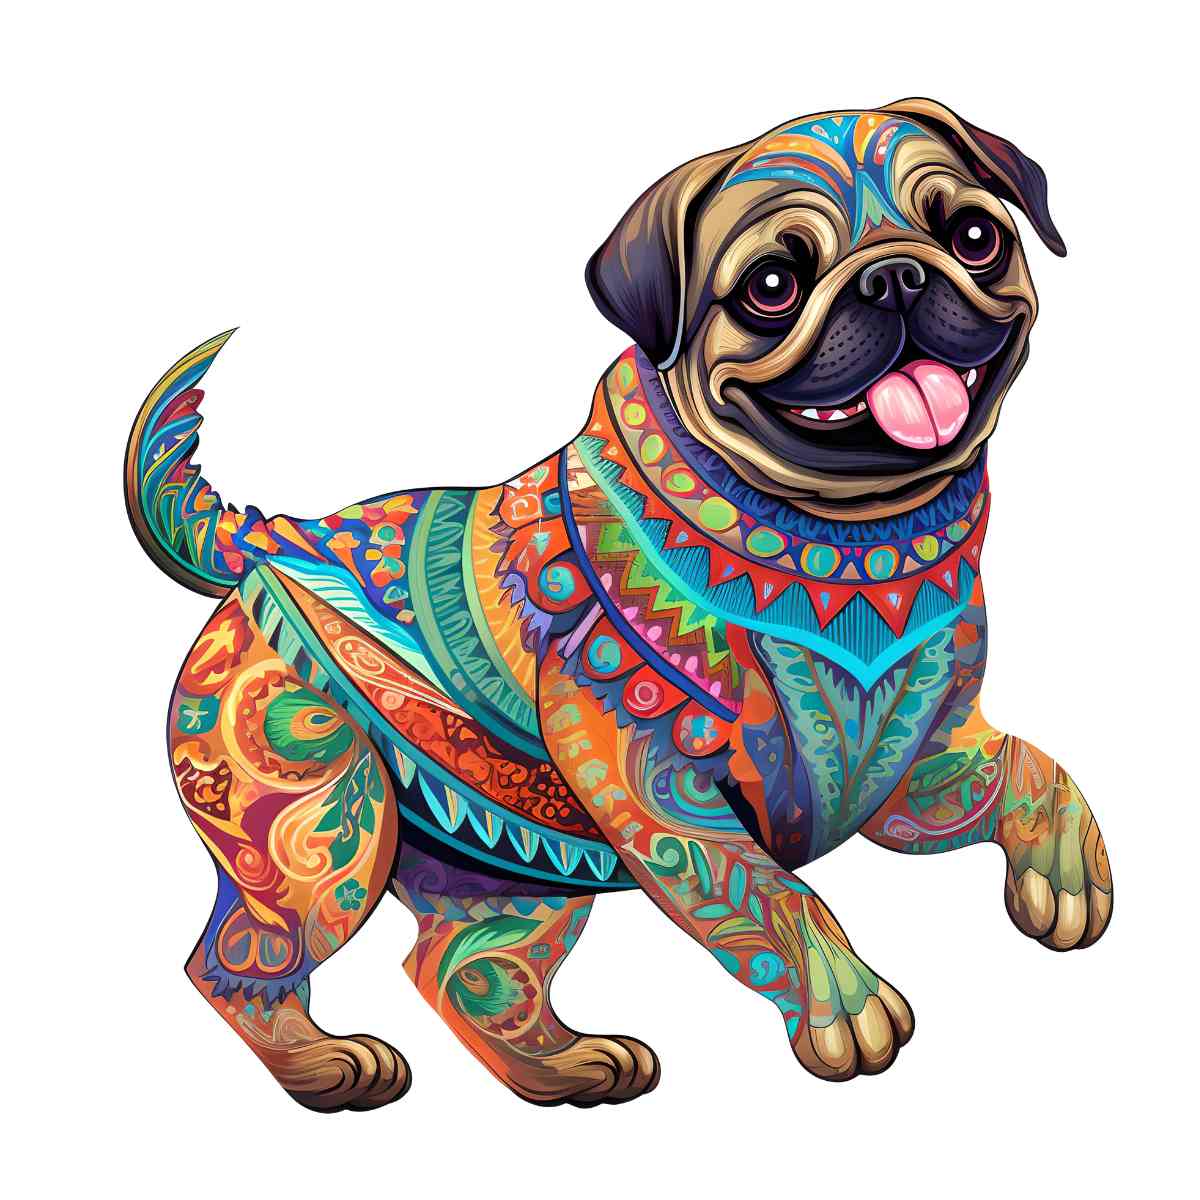 Animal Jigsaw Puzzle > Wooden Jigsaw Puzzle > Jigsaw Puzzle A3 Pug Dog - Jigsaw Puzzle